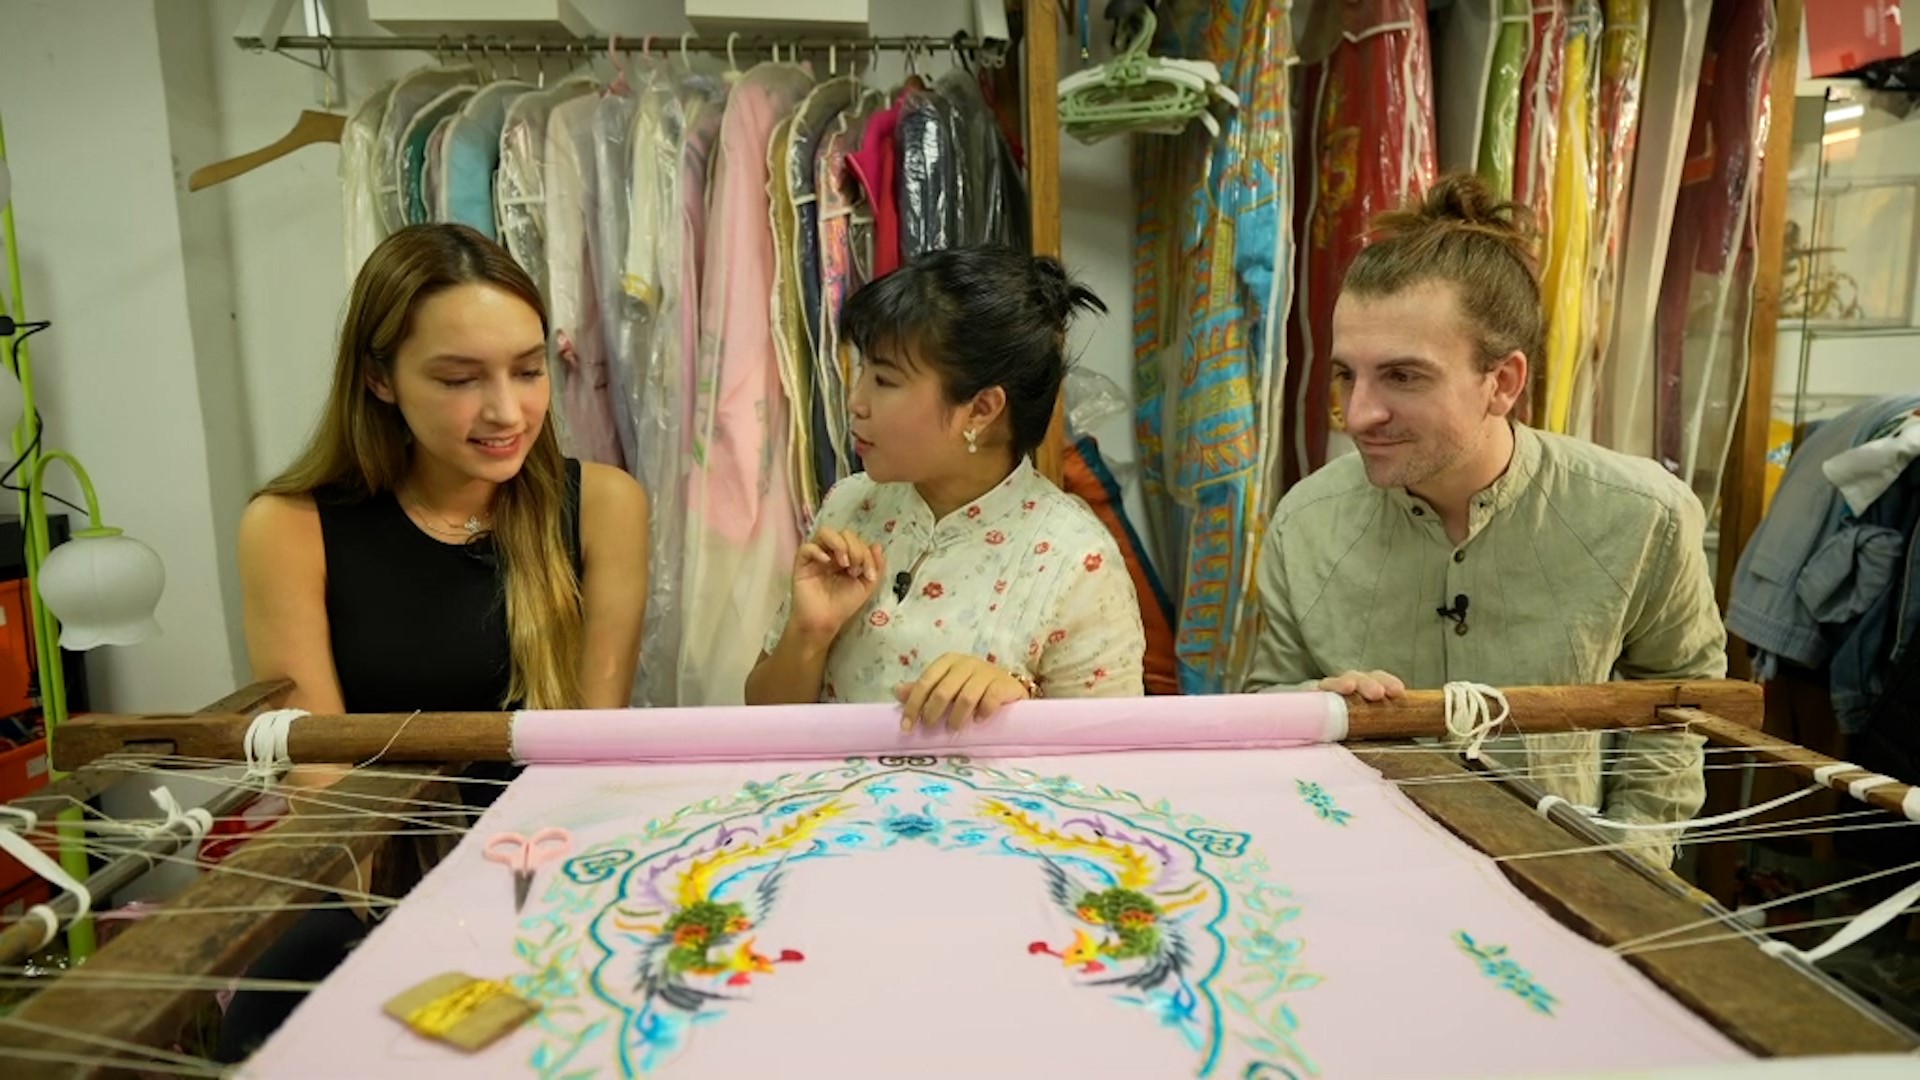 Minh Hoa Piron (left) from the United States and Jacopo Maria Lasala (right) from Italy talk with He Fengting at the Zhuangyuanfang Costume Factory in Guangzhou, south China's Guangdong Province. /CMG